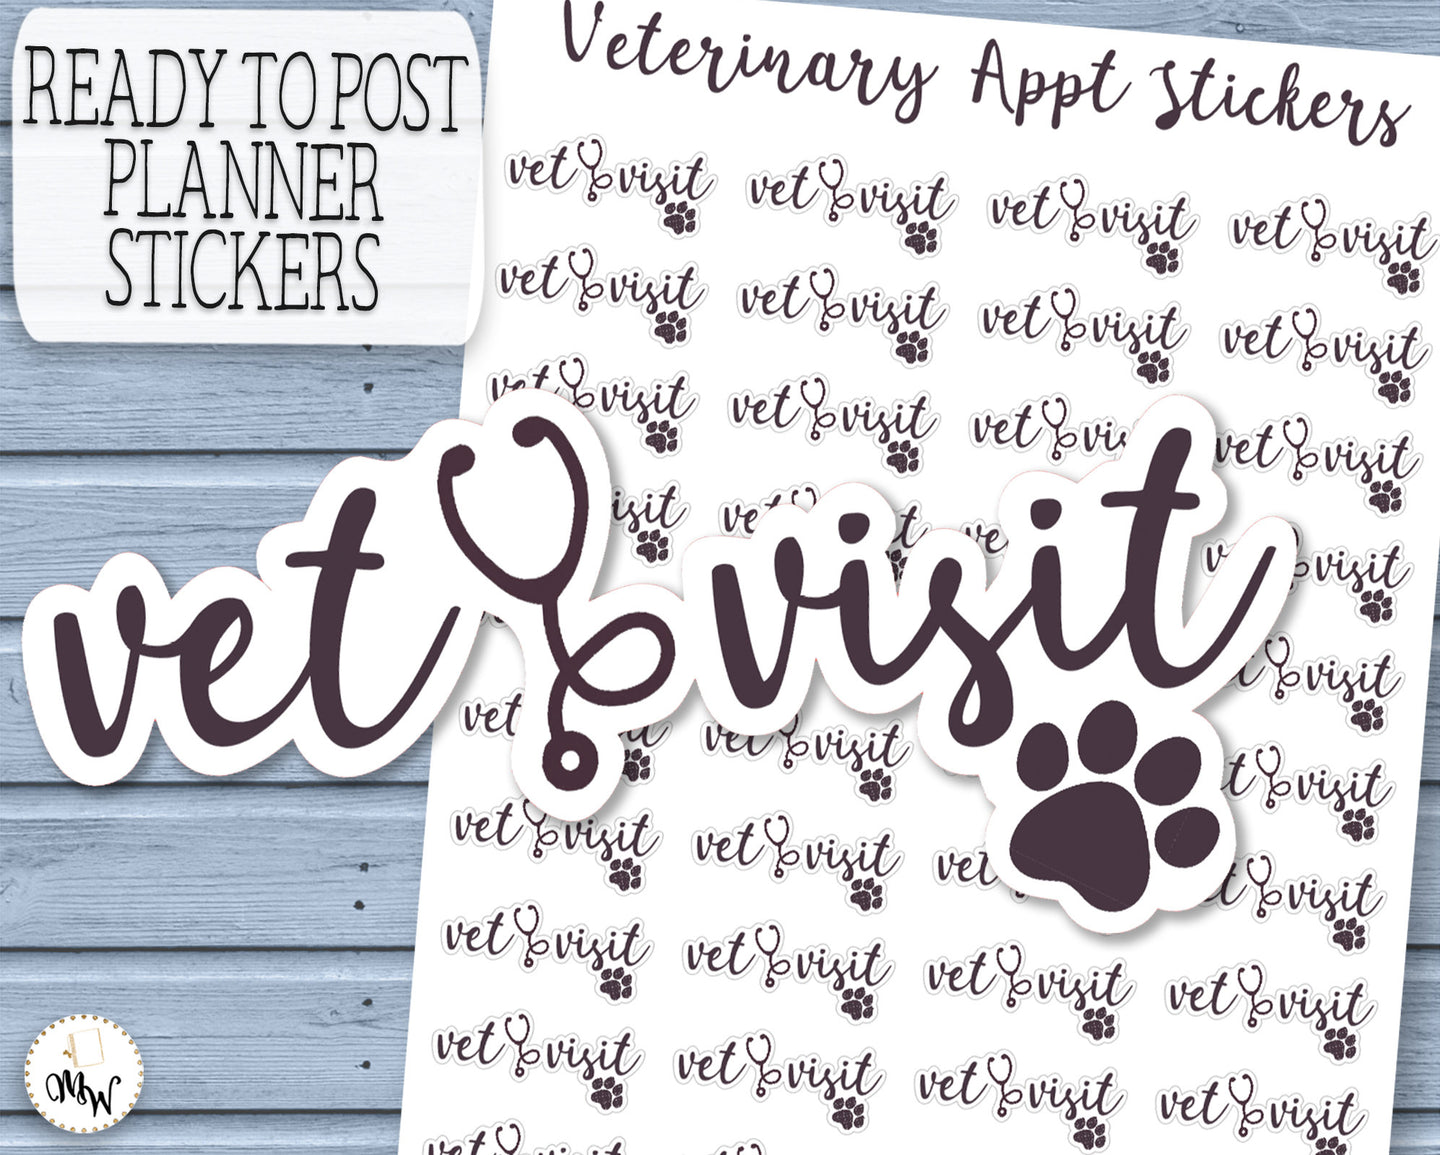 Veterinary Reminder Stickers, Vet appointment stickers handmade in the UK.